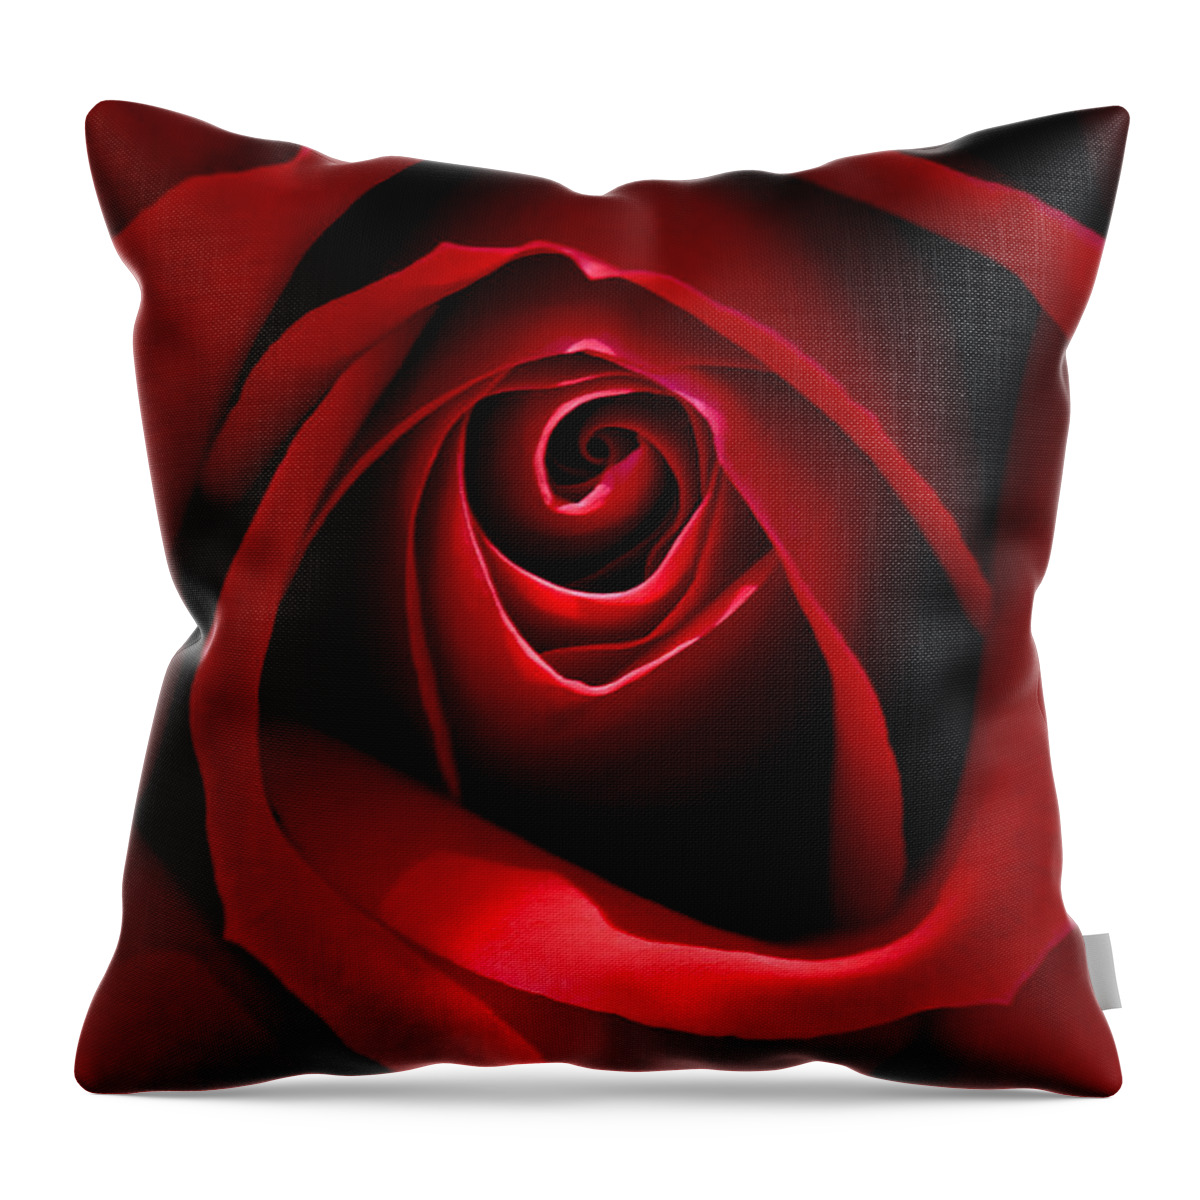 Flowers Throw Pillow featuring the photograph Red Rose by Windy Osborn